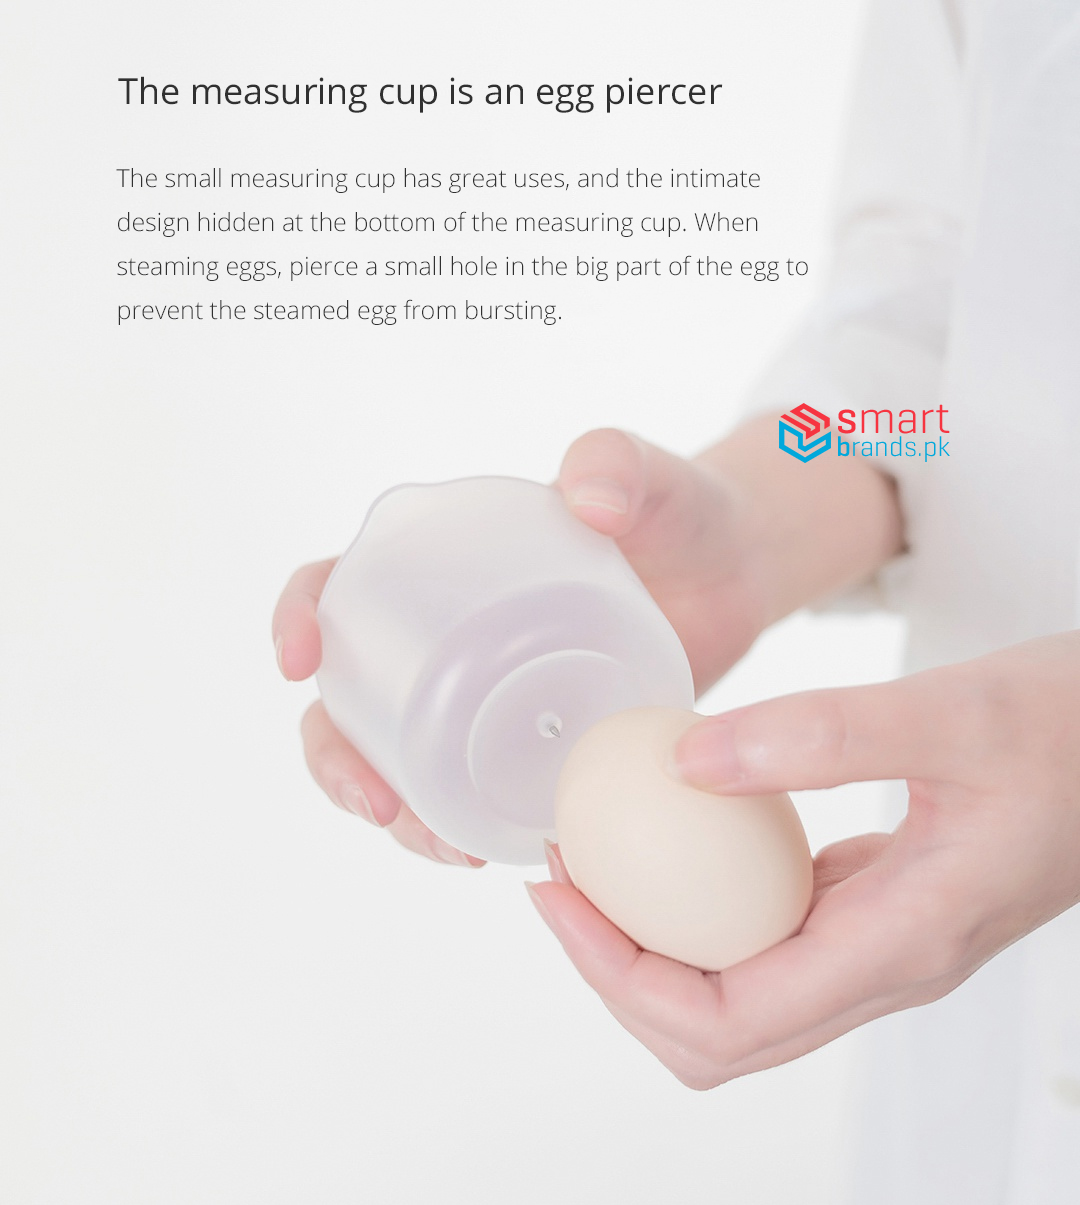 The small measuring cup has great uses, and the intimate design hidden at the bottom of the measuring cup. When steaming eggs, pierce a small hole in the big part of the egg to prevent the steamed egg from bursting.